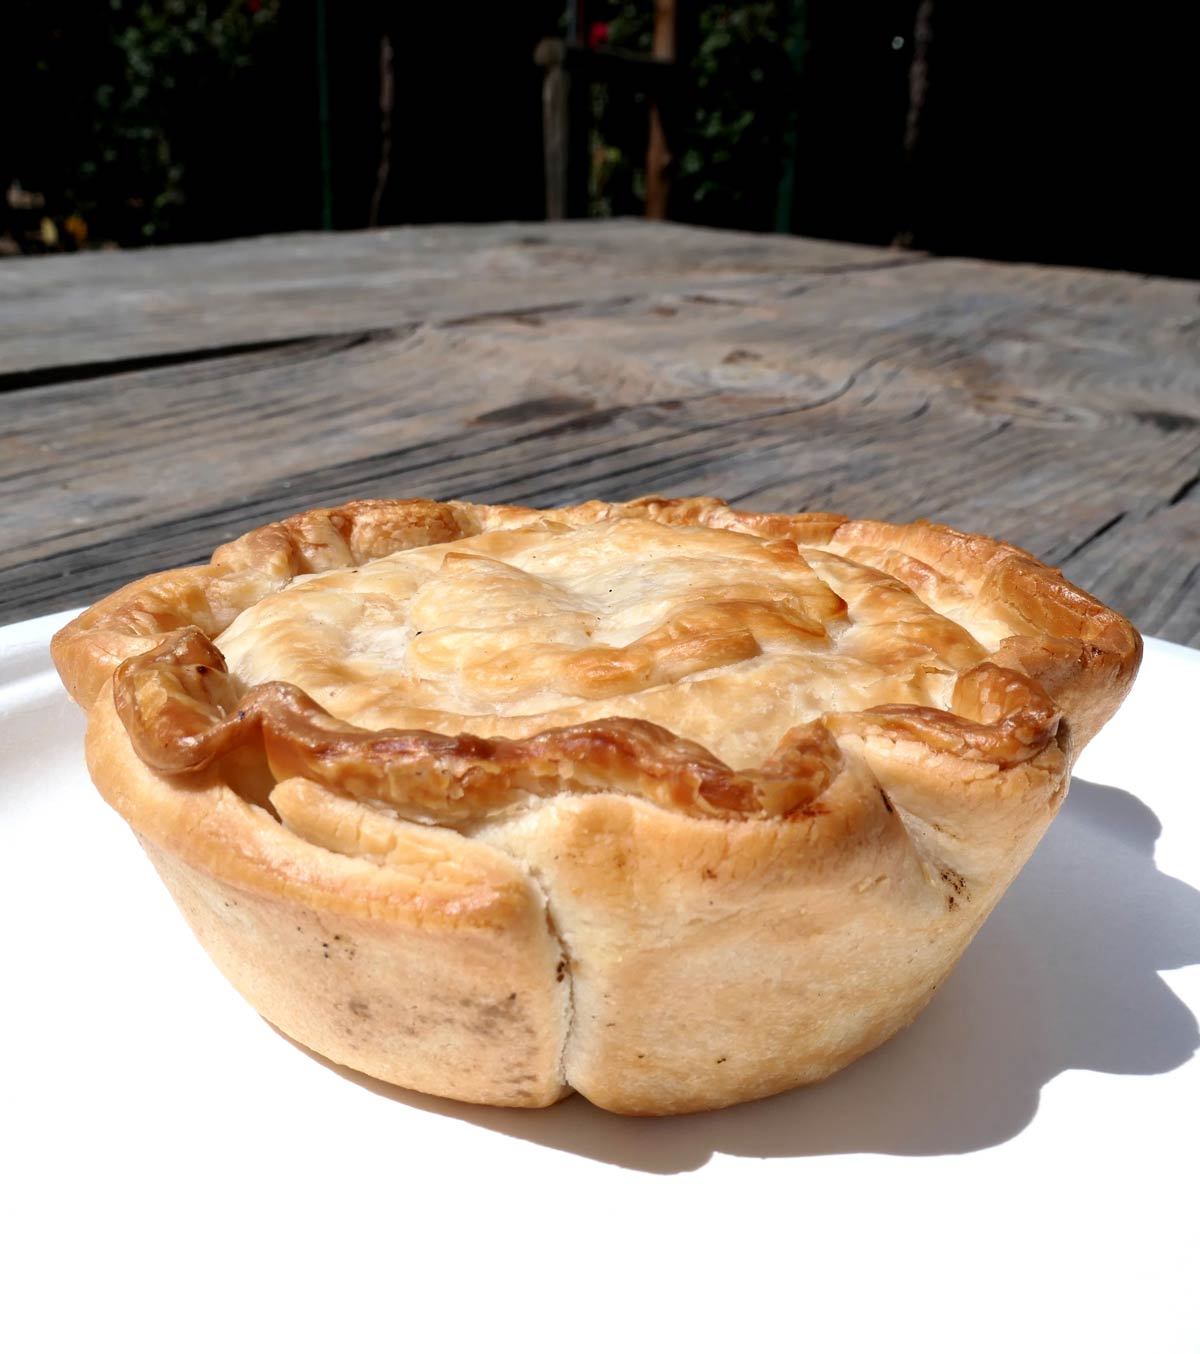 Chicken, Wine and Camembert Pie from Stone Hut Bakery, South Australia